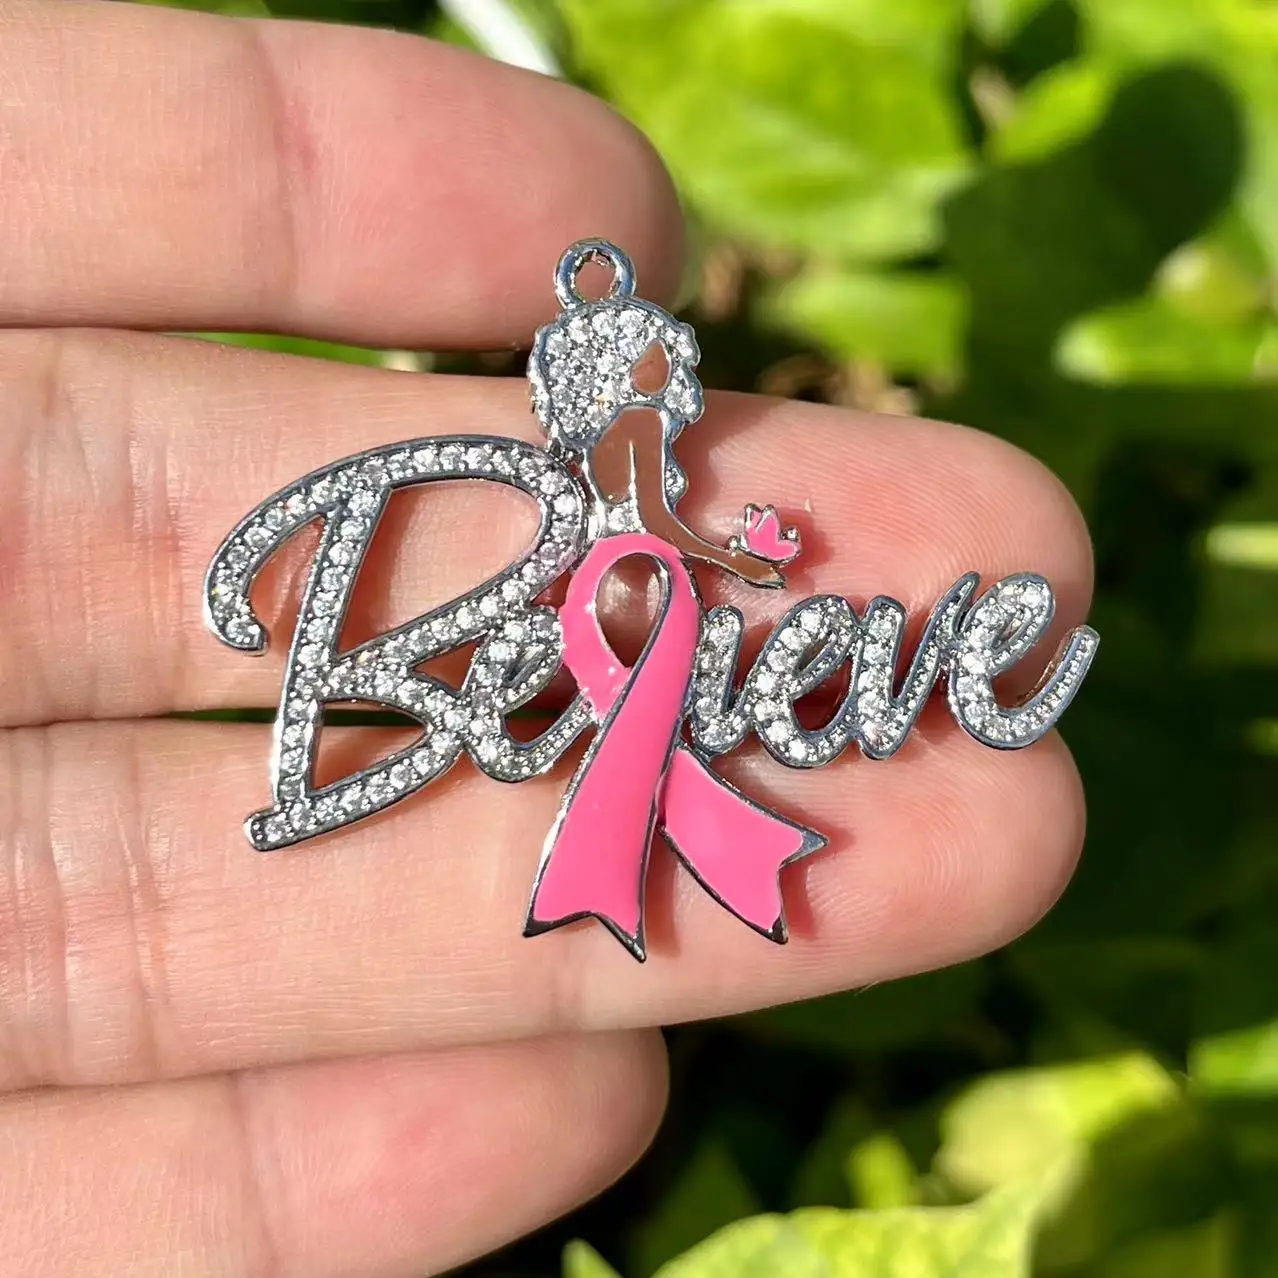 Amazon.com: Handmade Silver Breast Cancer Awareness Ribbon Charm Necklace -  Sterling Silver, Pink Tourmaline - 16 Inches - Gift for Survivor, Present  for Fighter, Warrior : Handmade Products